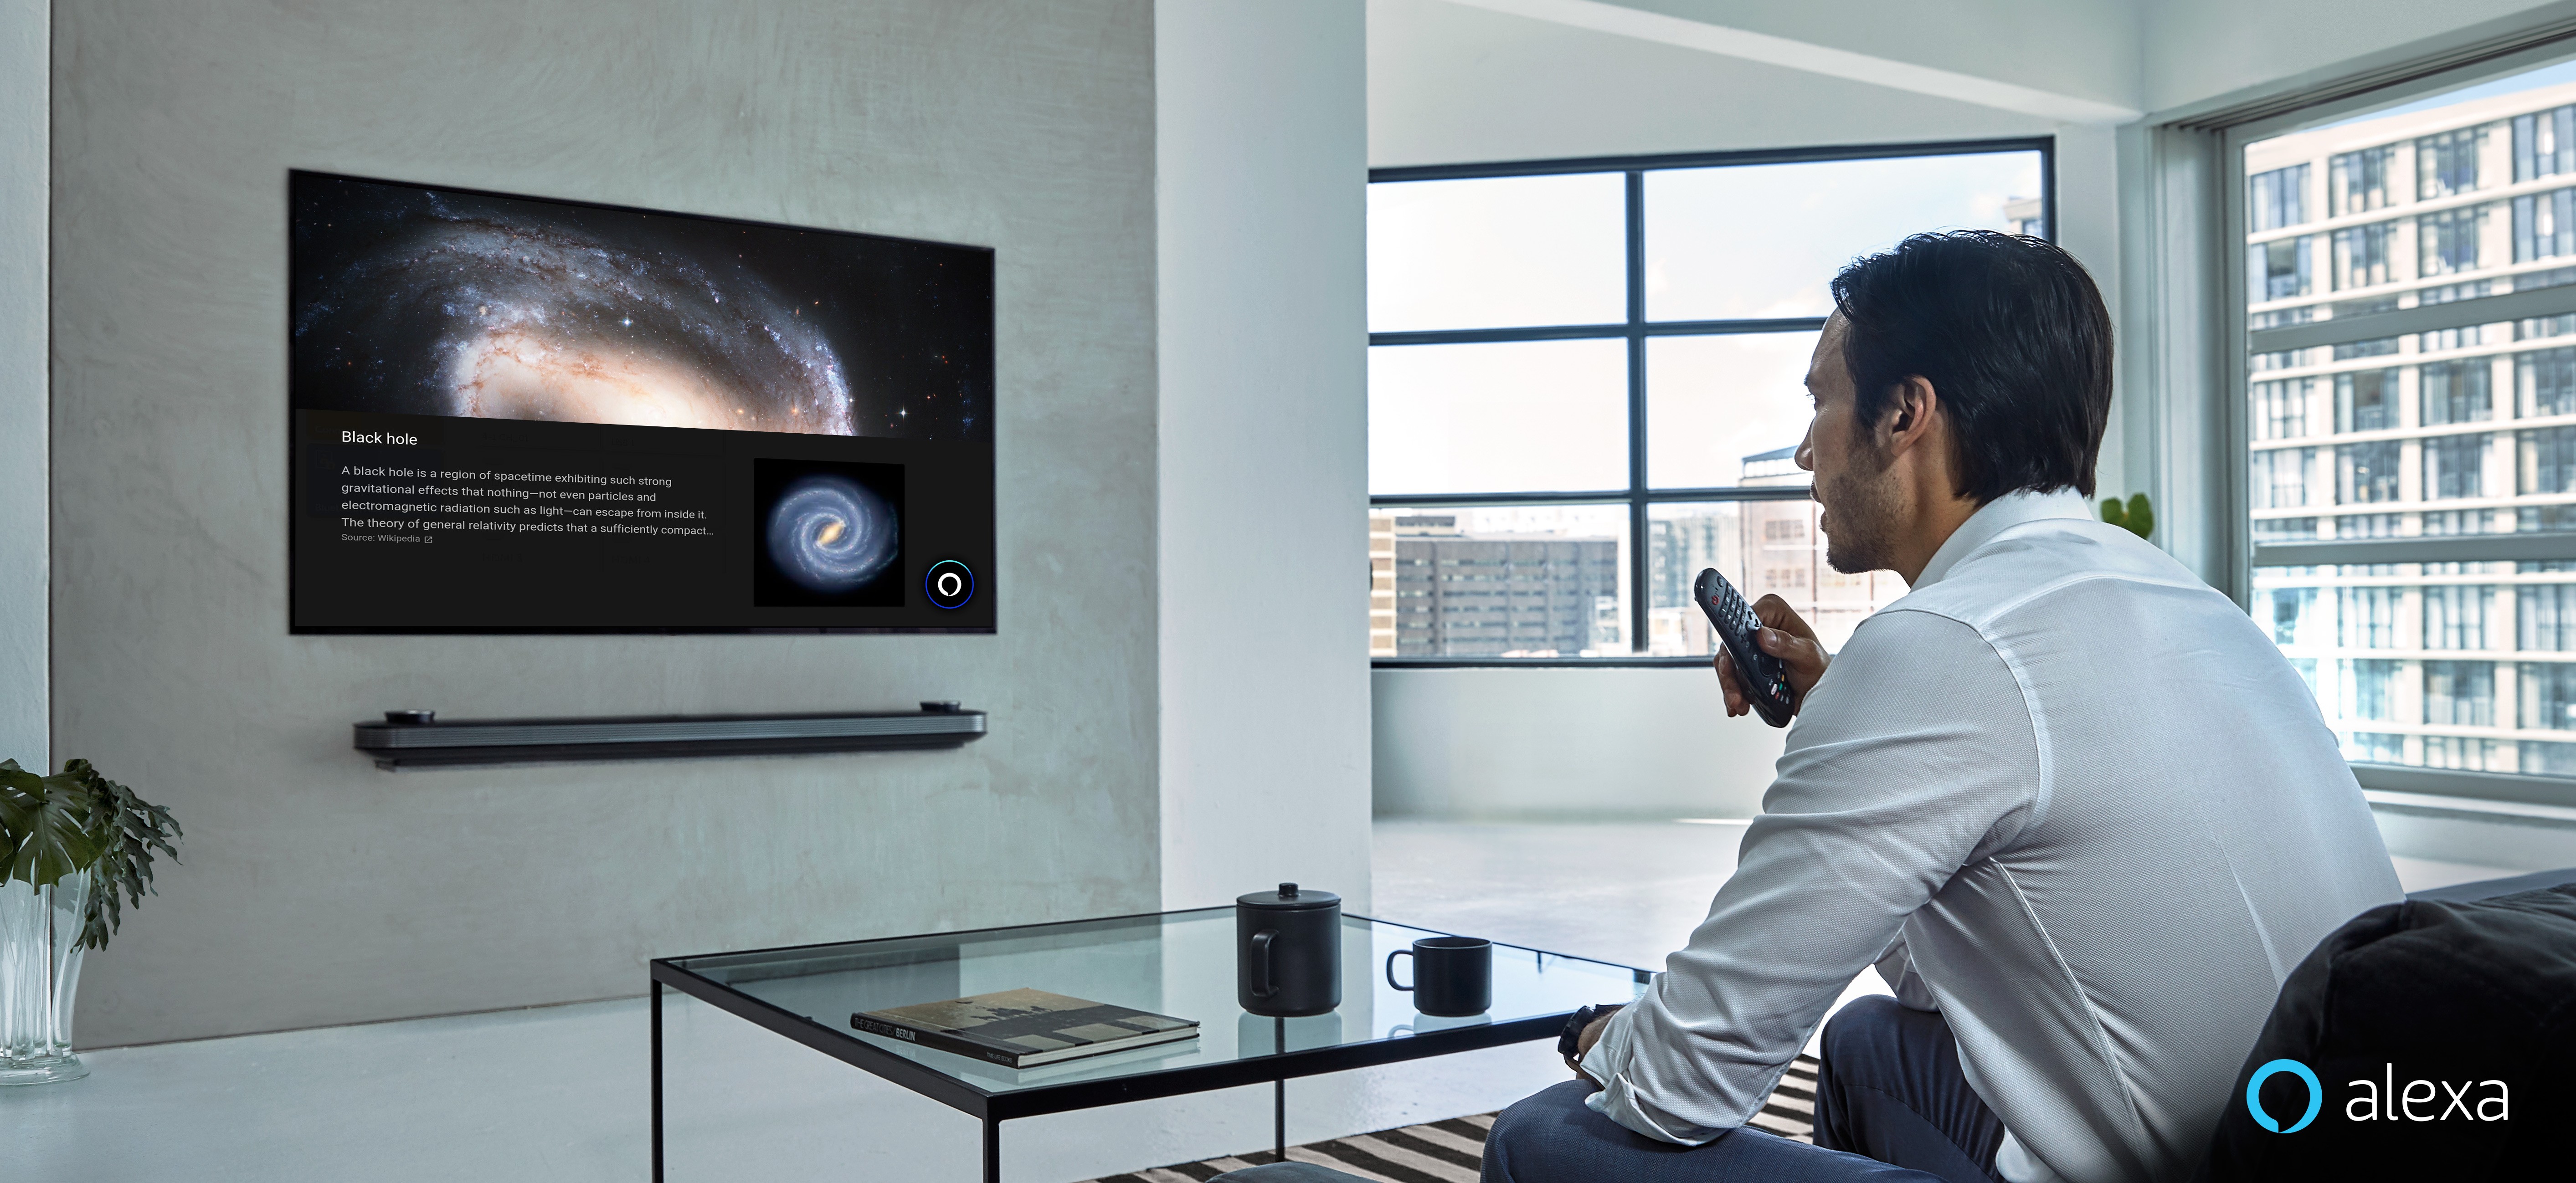 A man is watching LG TV supporting Amazon Alexa while holding the remote in one hand at home.